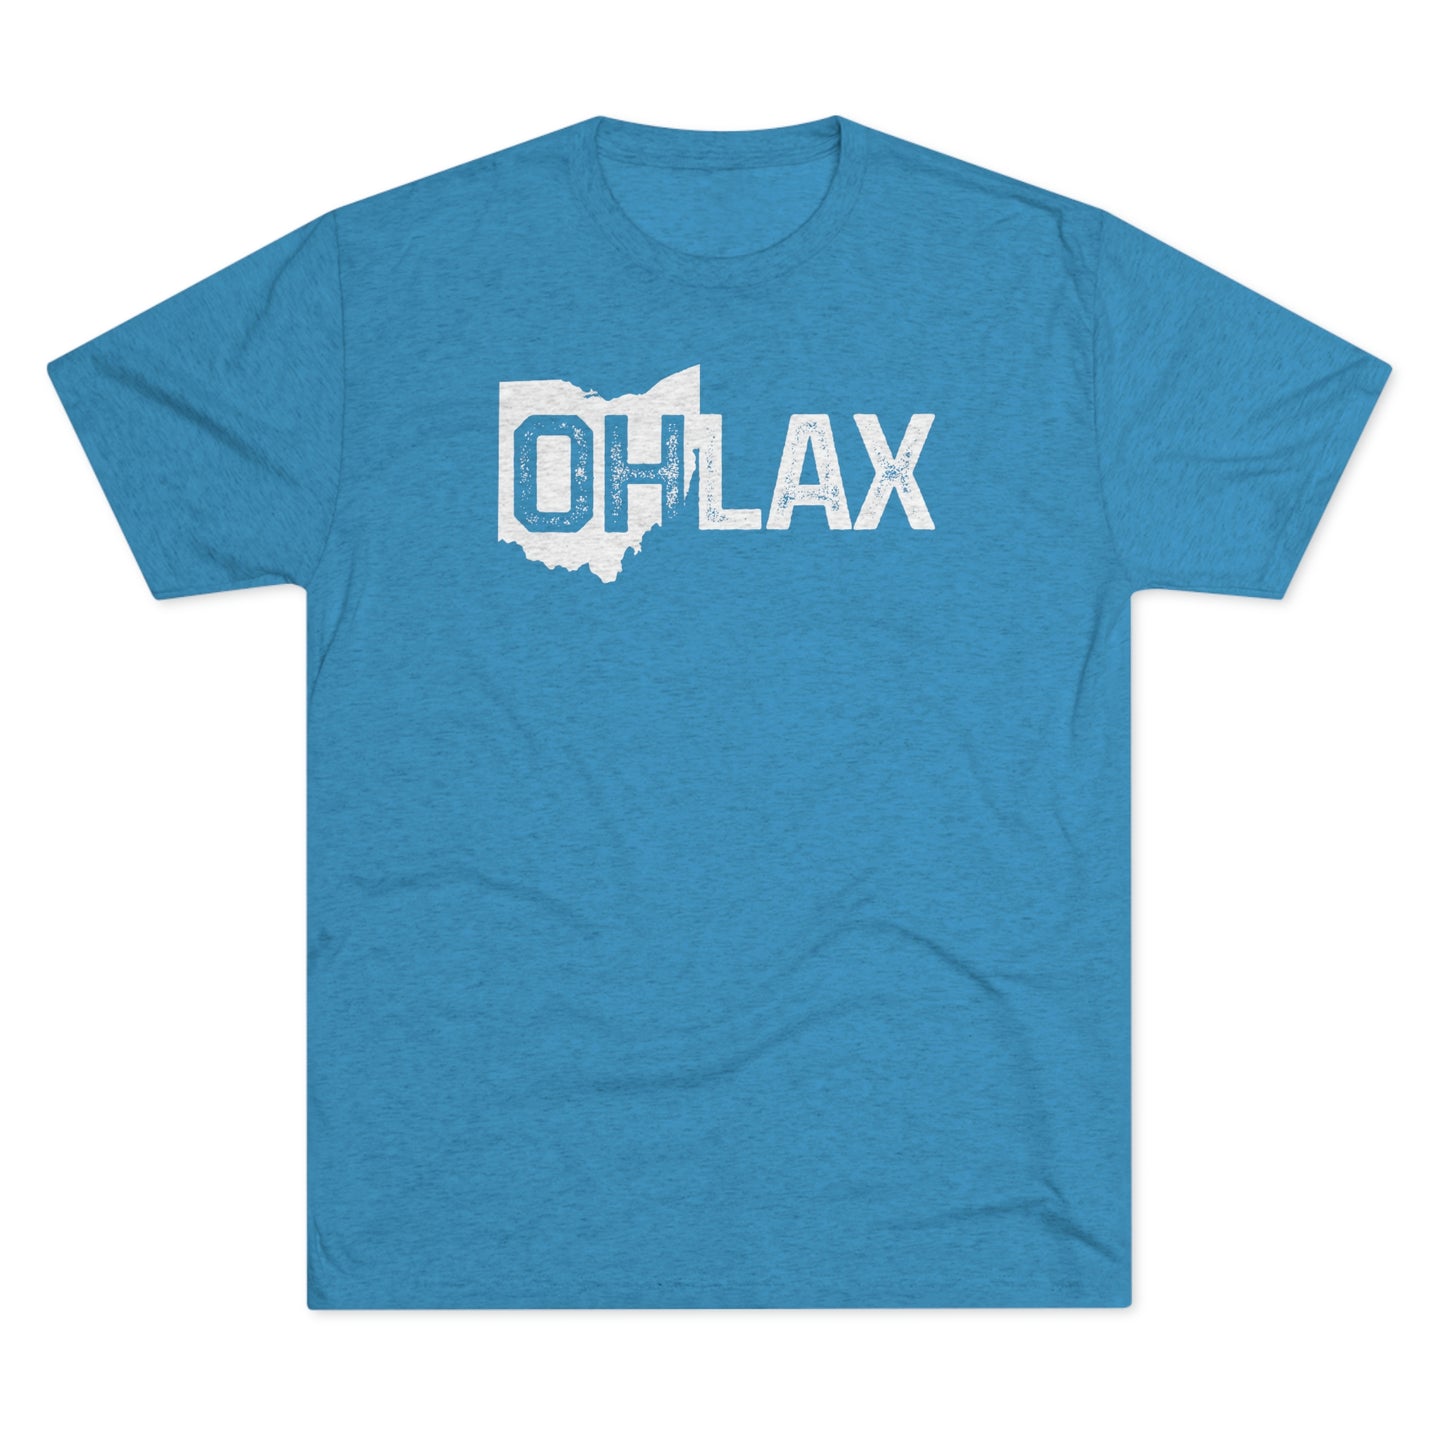 OH STATE SHAPE LAX-Unisex Tri-Blend Crew Tee